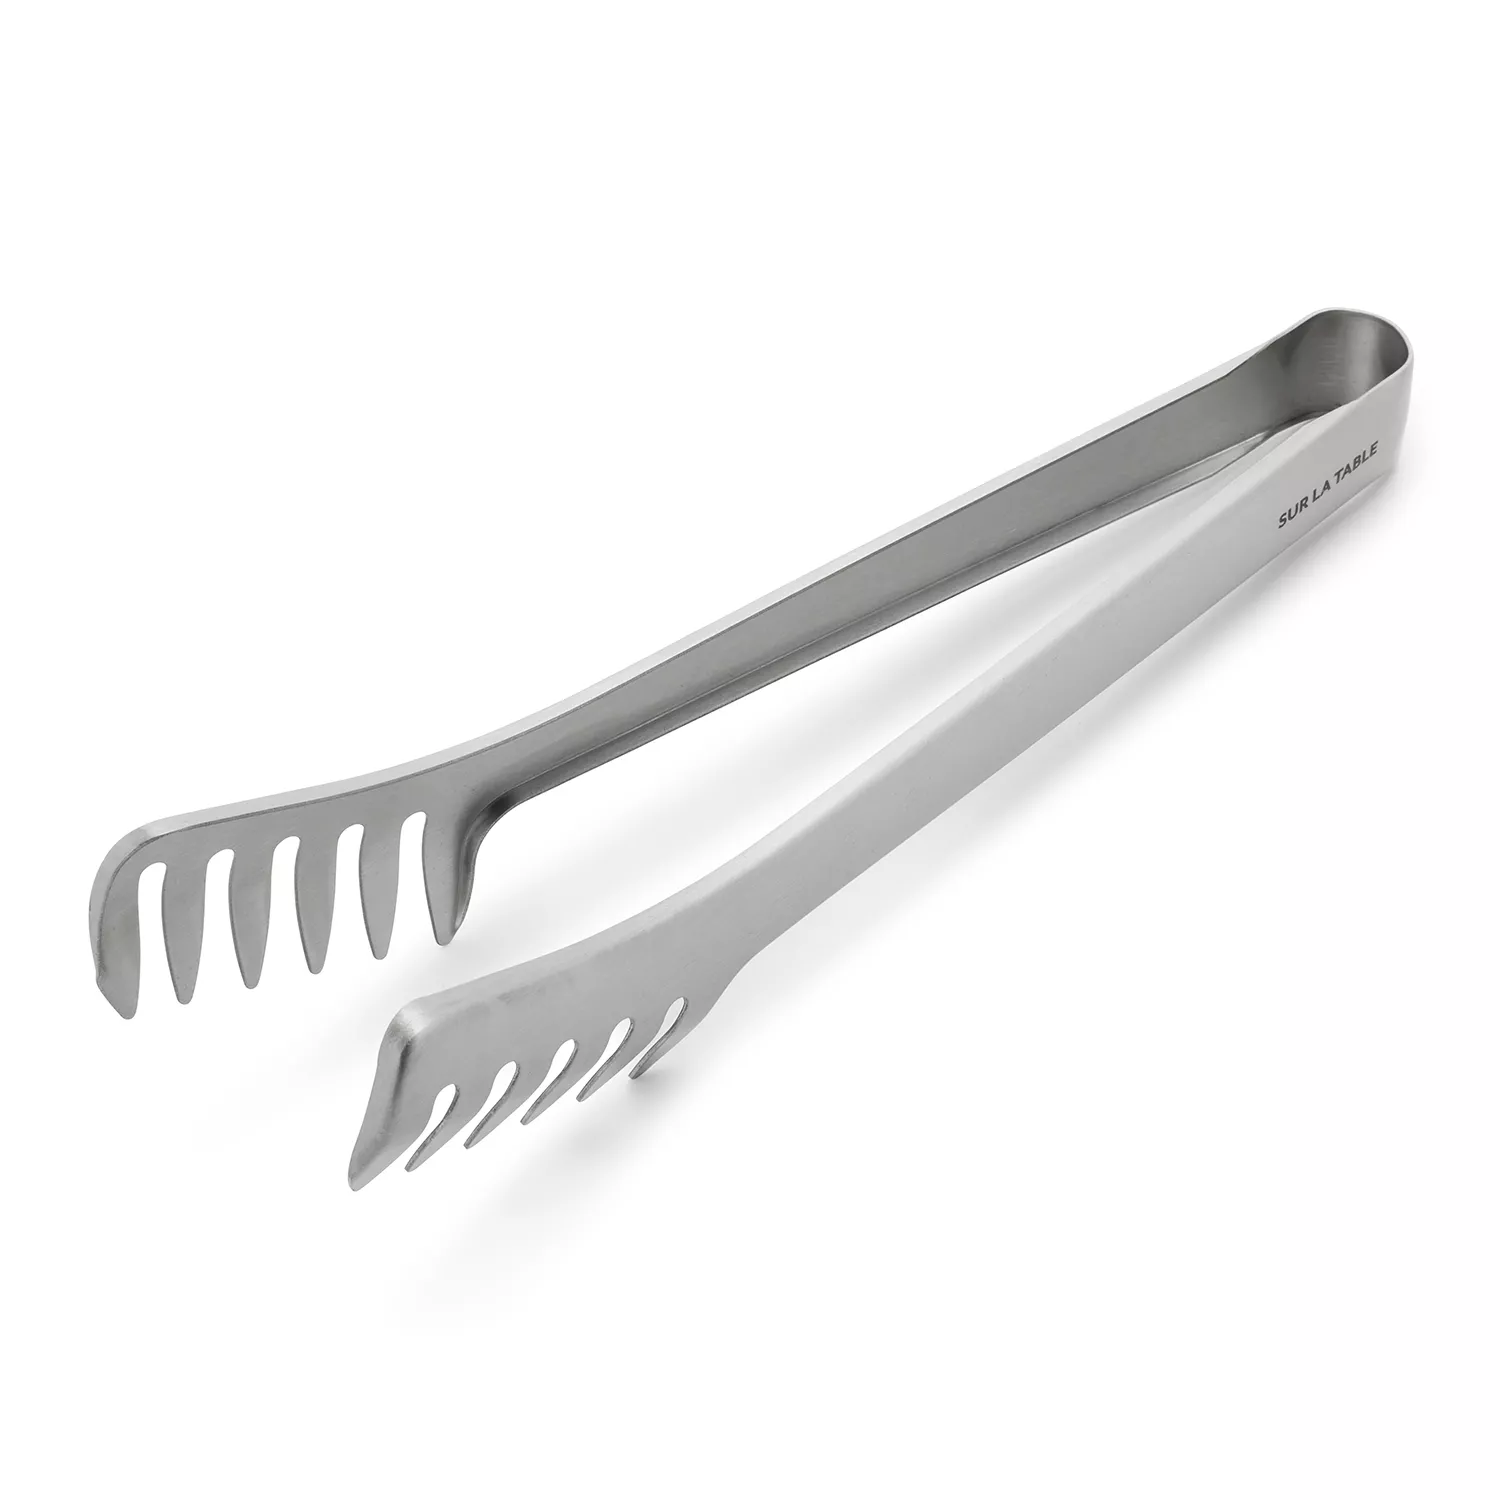 Zyliss Cook N Serve Tongs